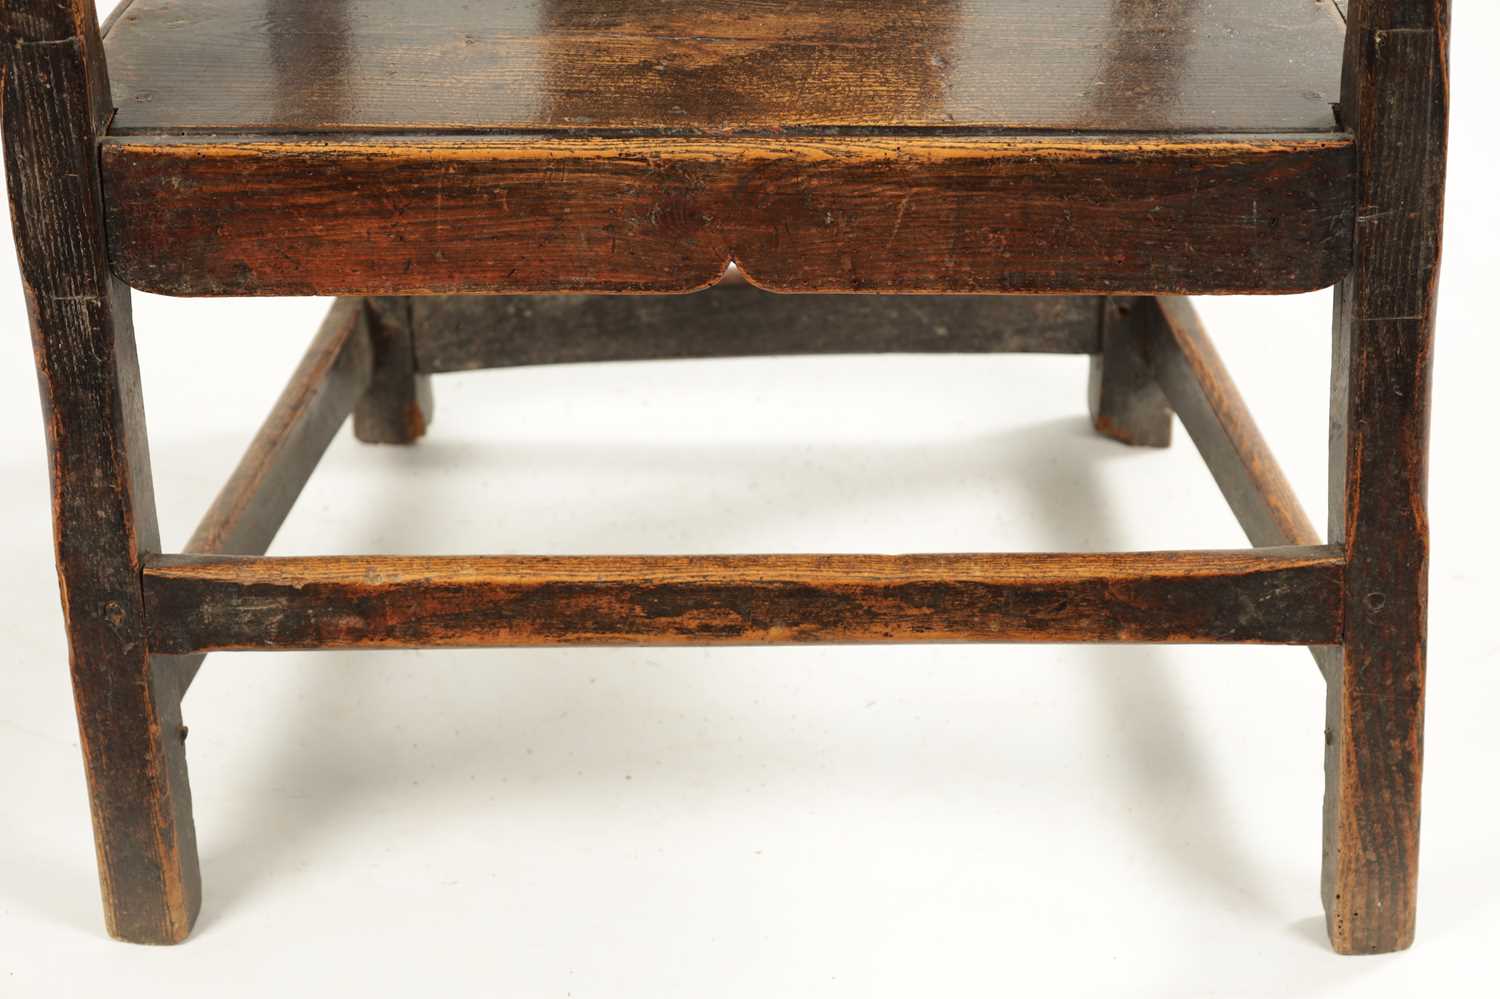 AN 18TH CENTURY PRIMITIVE ASH AND ELM COUNTRY ARMCHAIR - Image 6 of 9